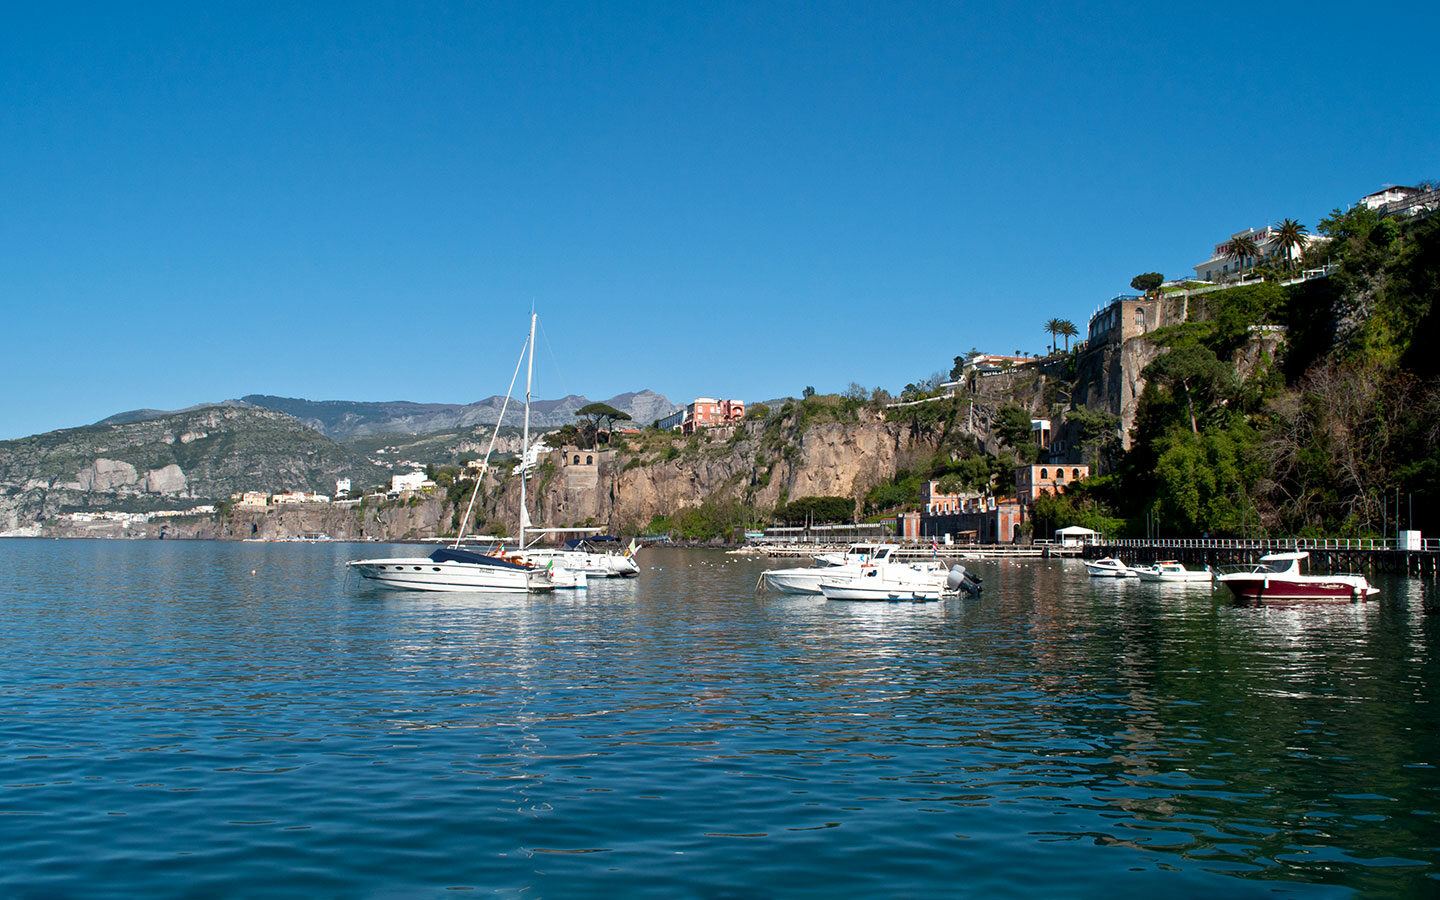 Boats in Sorrento harbour